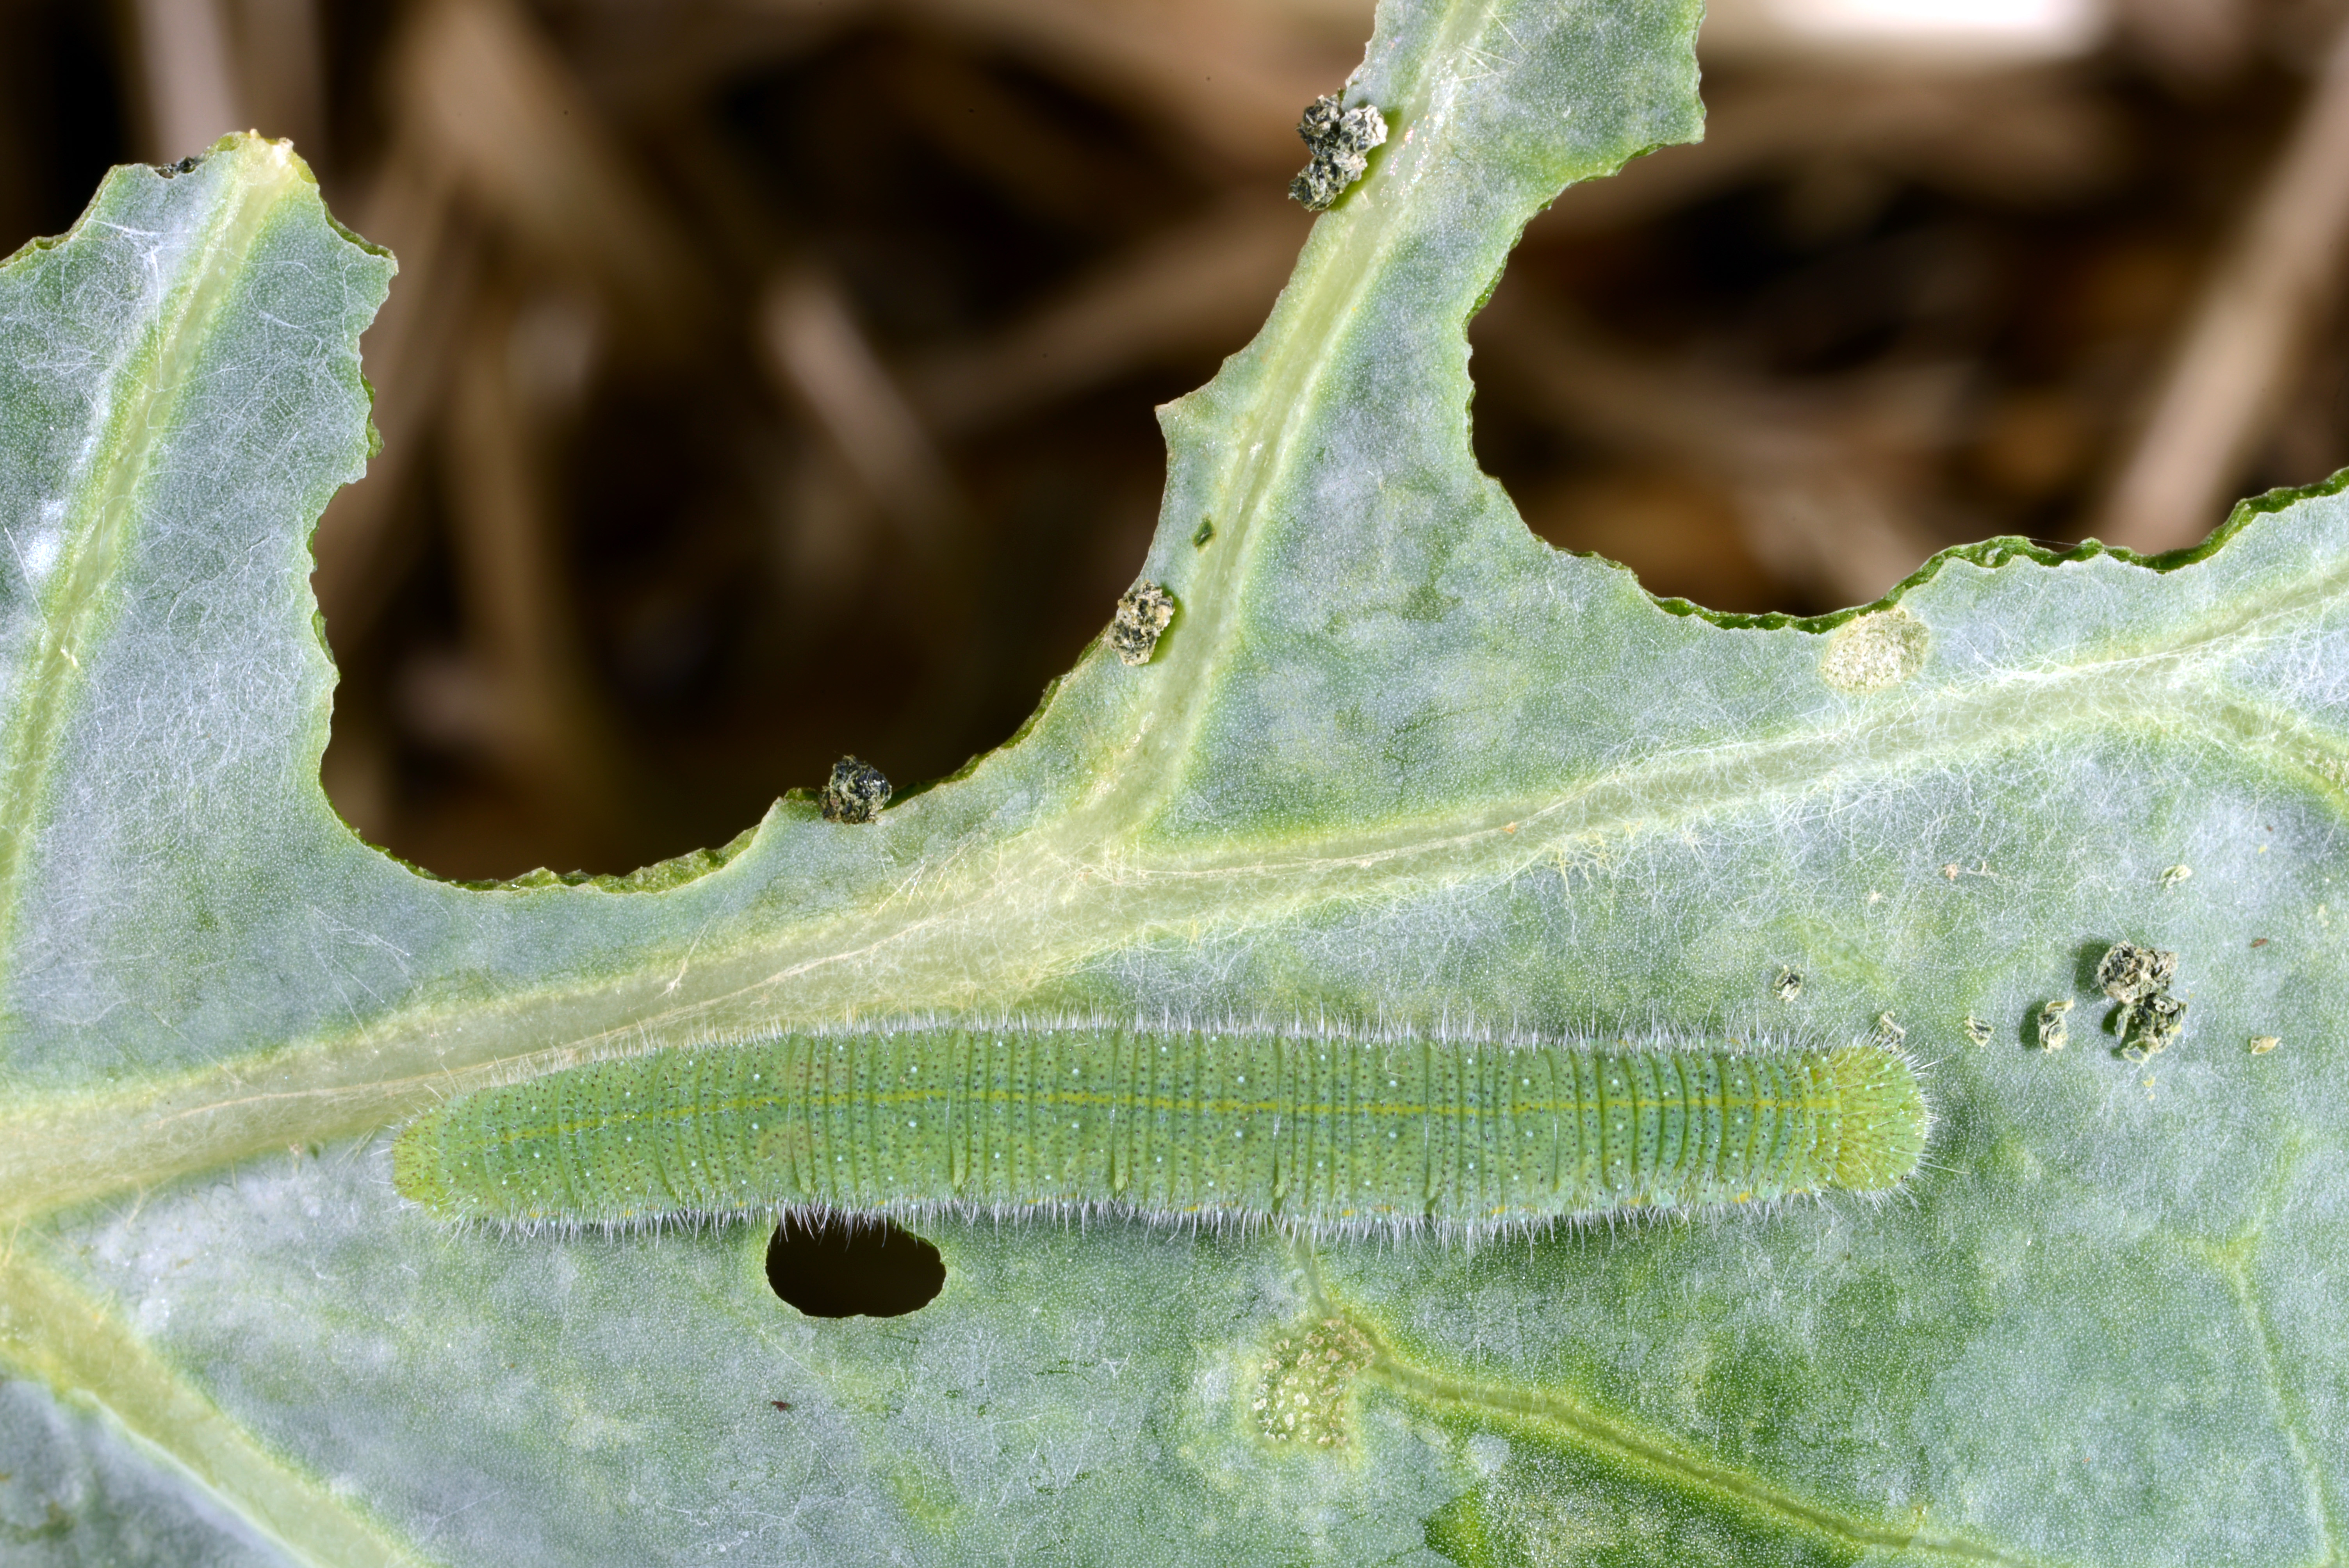 Imported cabbageworm and damage